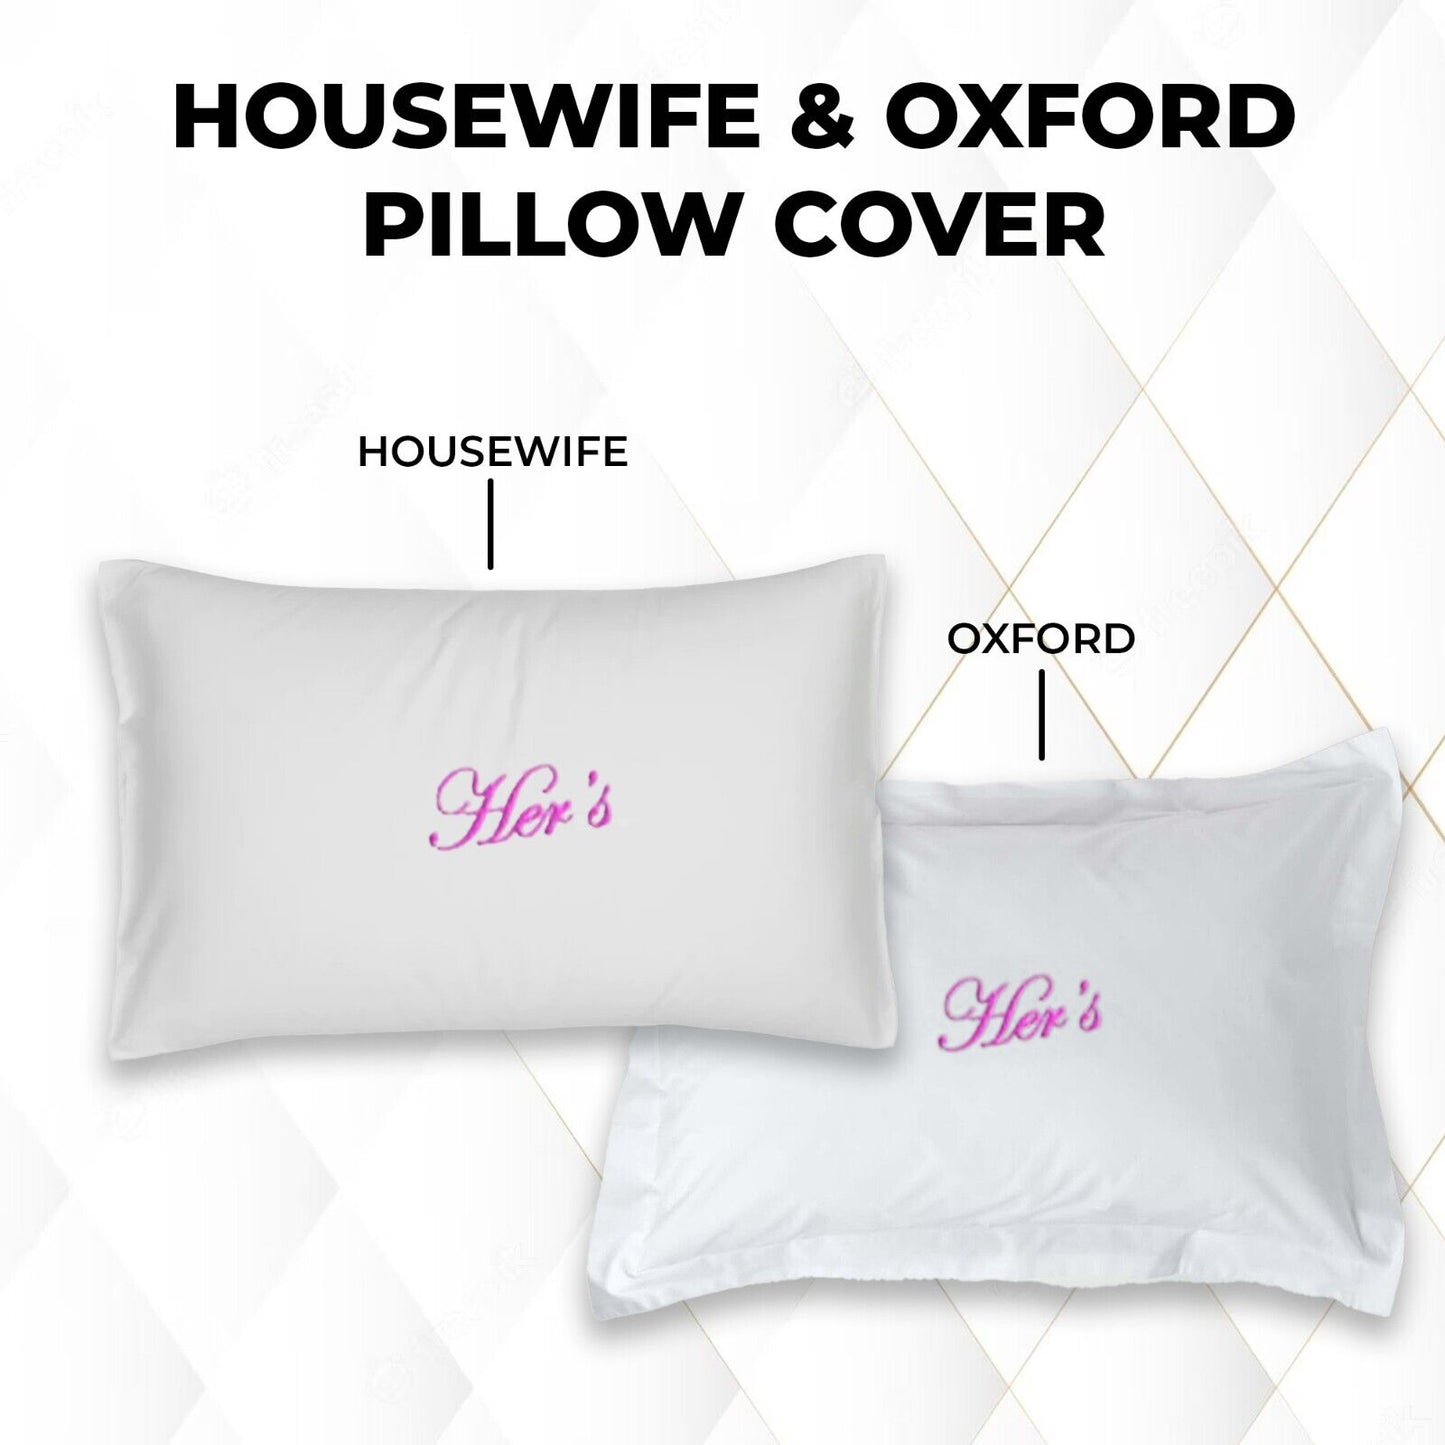 1-2 Pack Premium 100% Cotton Pillow Cases Housewife & Oxford Bed Pillow Cover ⭐⭐⭐⭐⭐